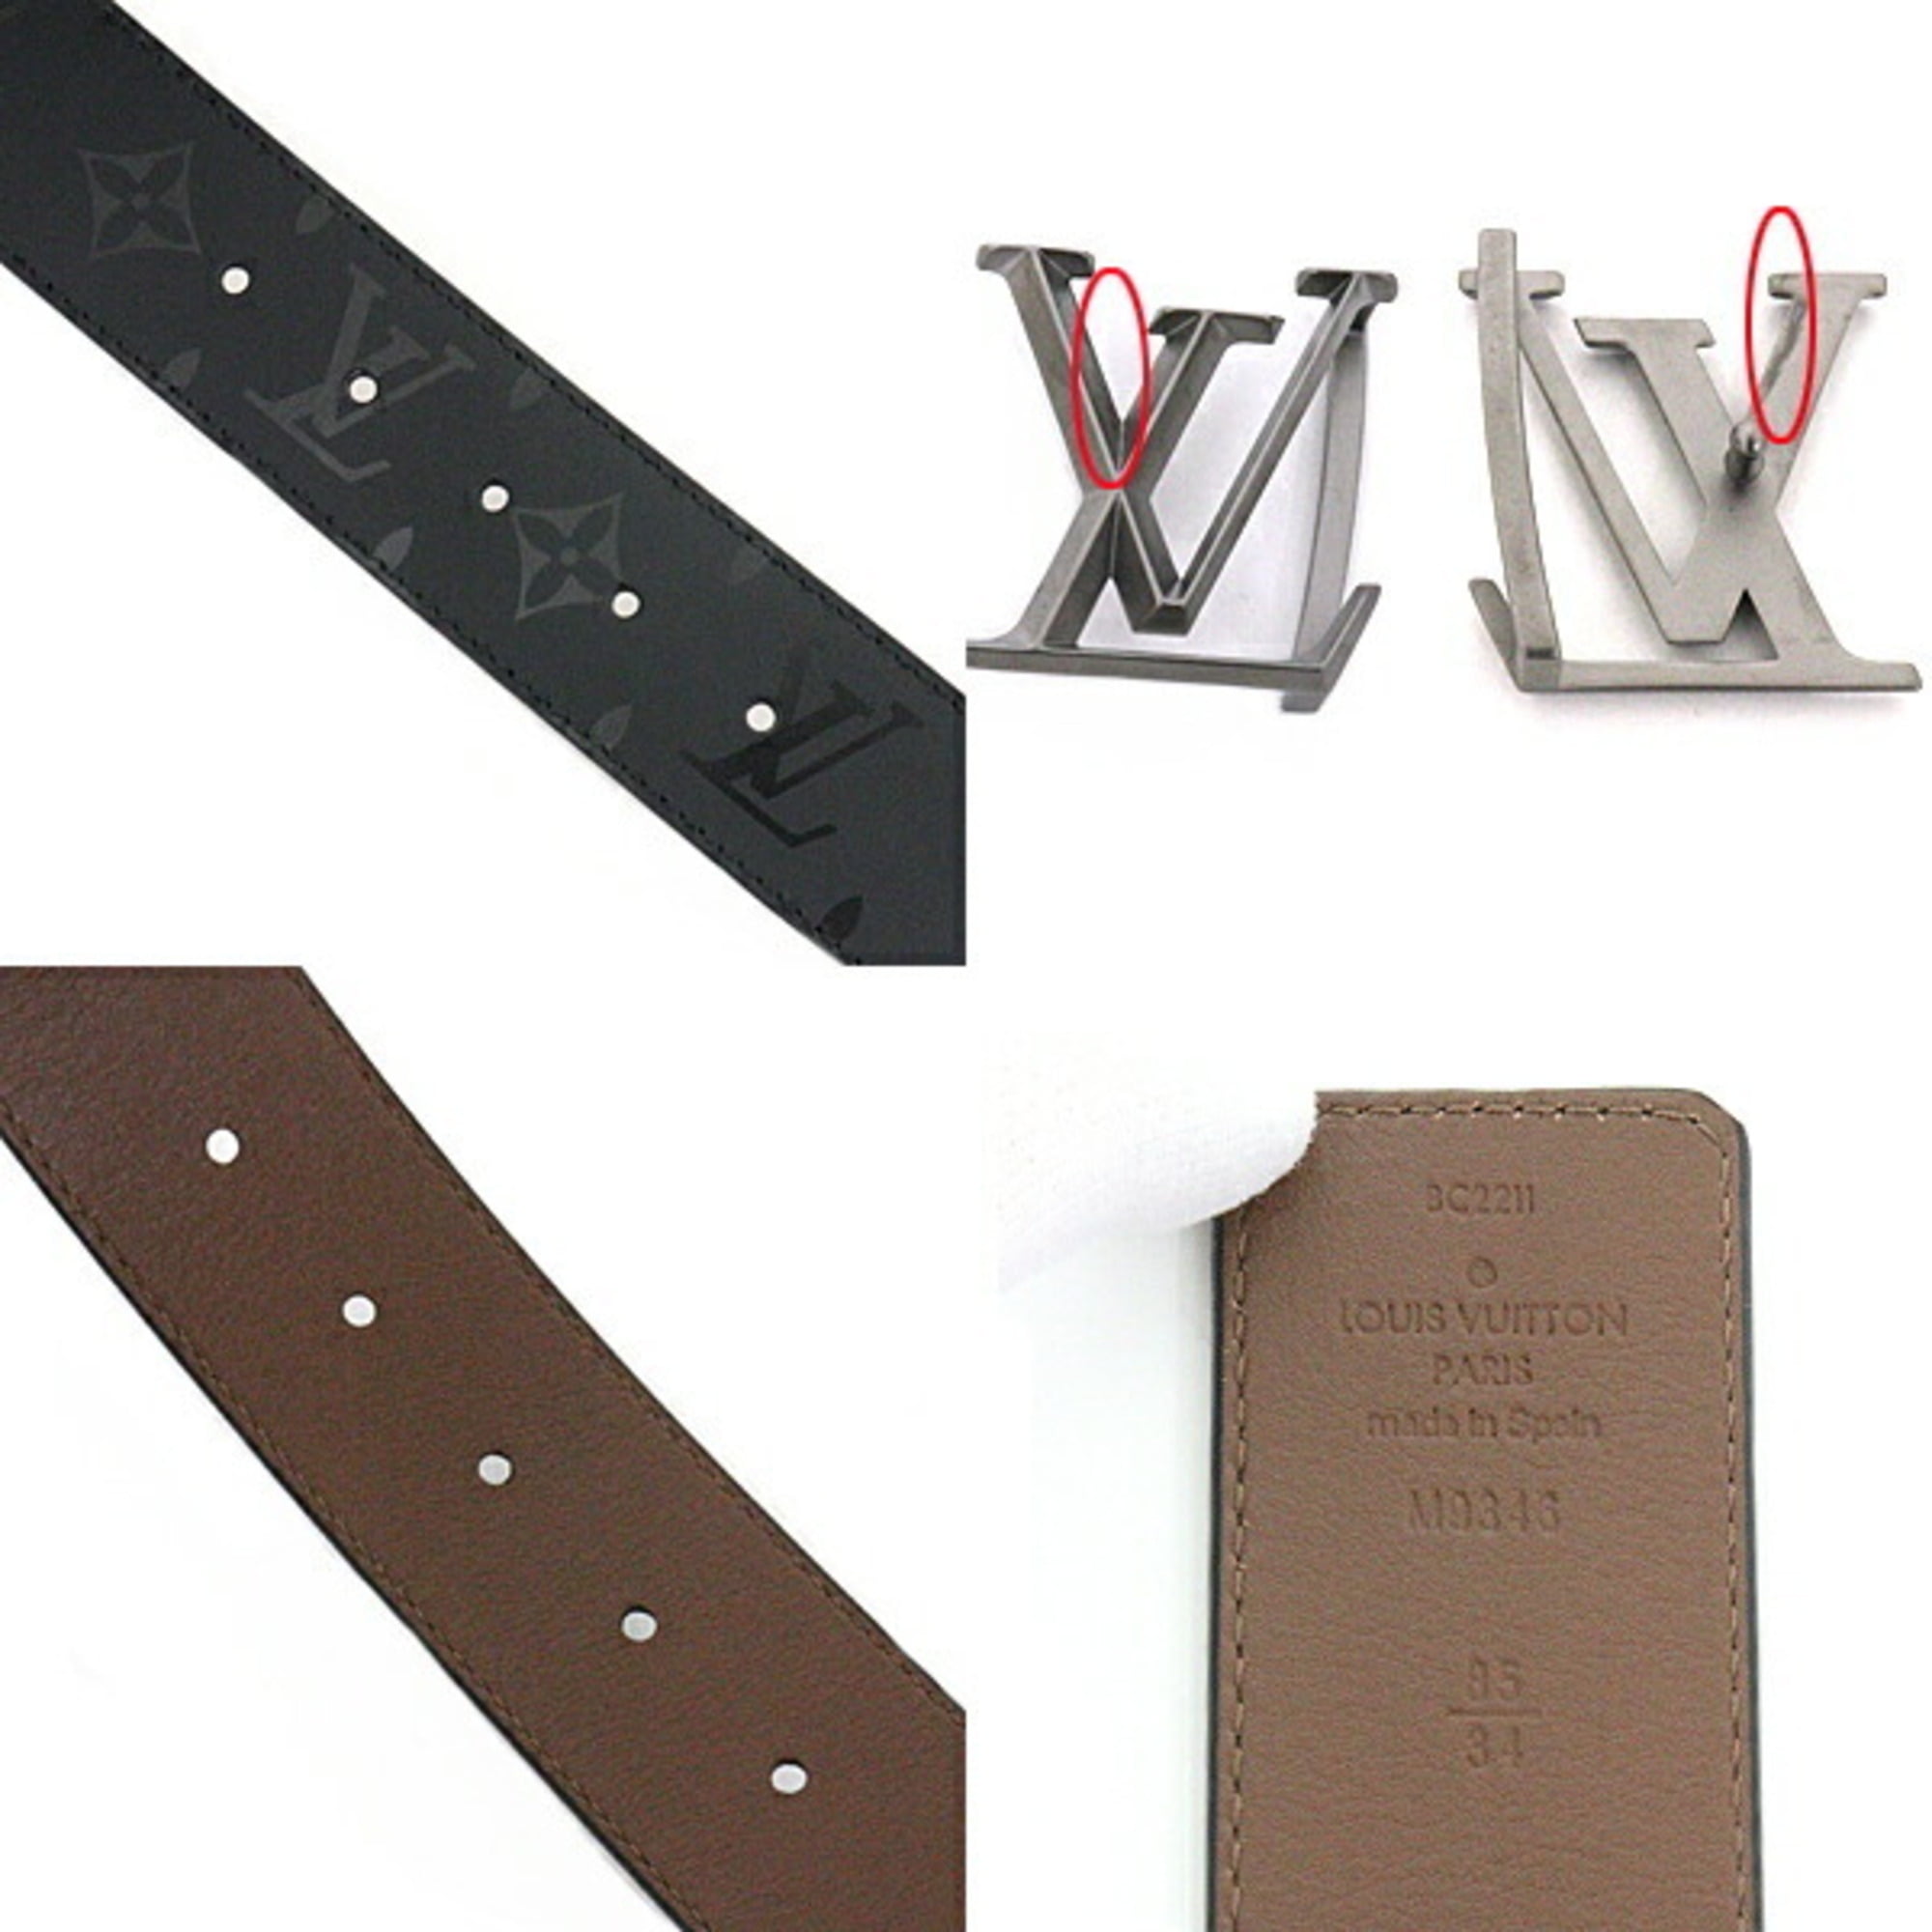 Authenticated Used LOUIS VUITTON Sunture LV Initial 40MM Pyramid Belt  Reversible M9346 Black Brown 